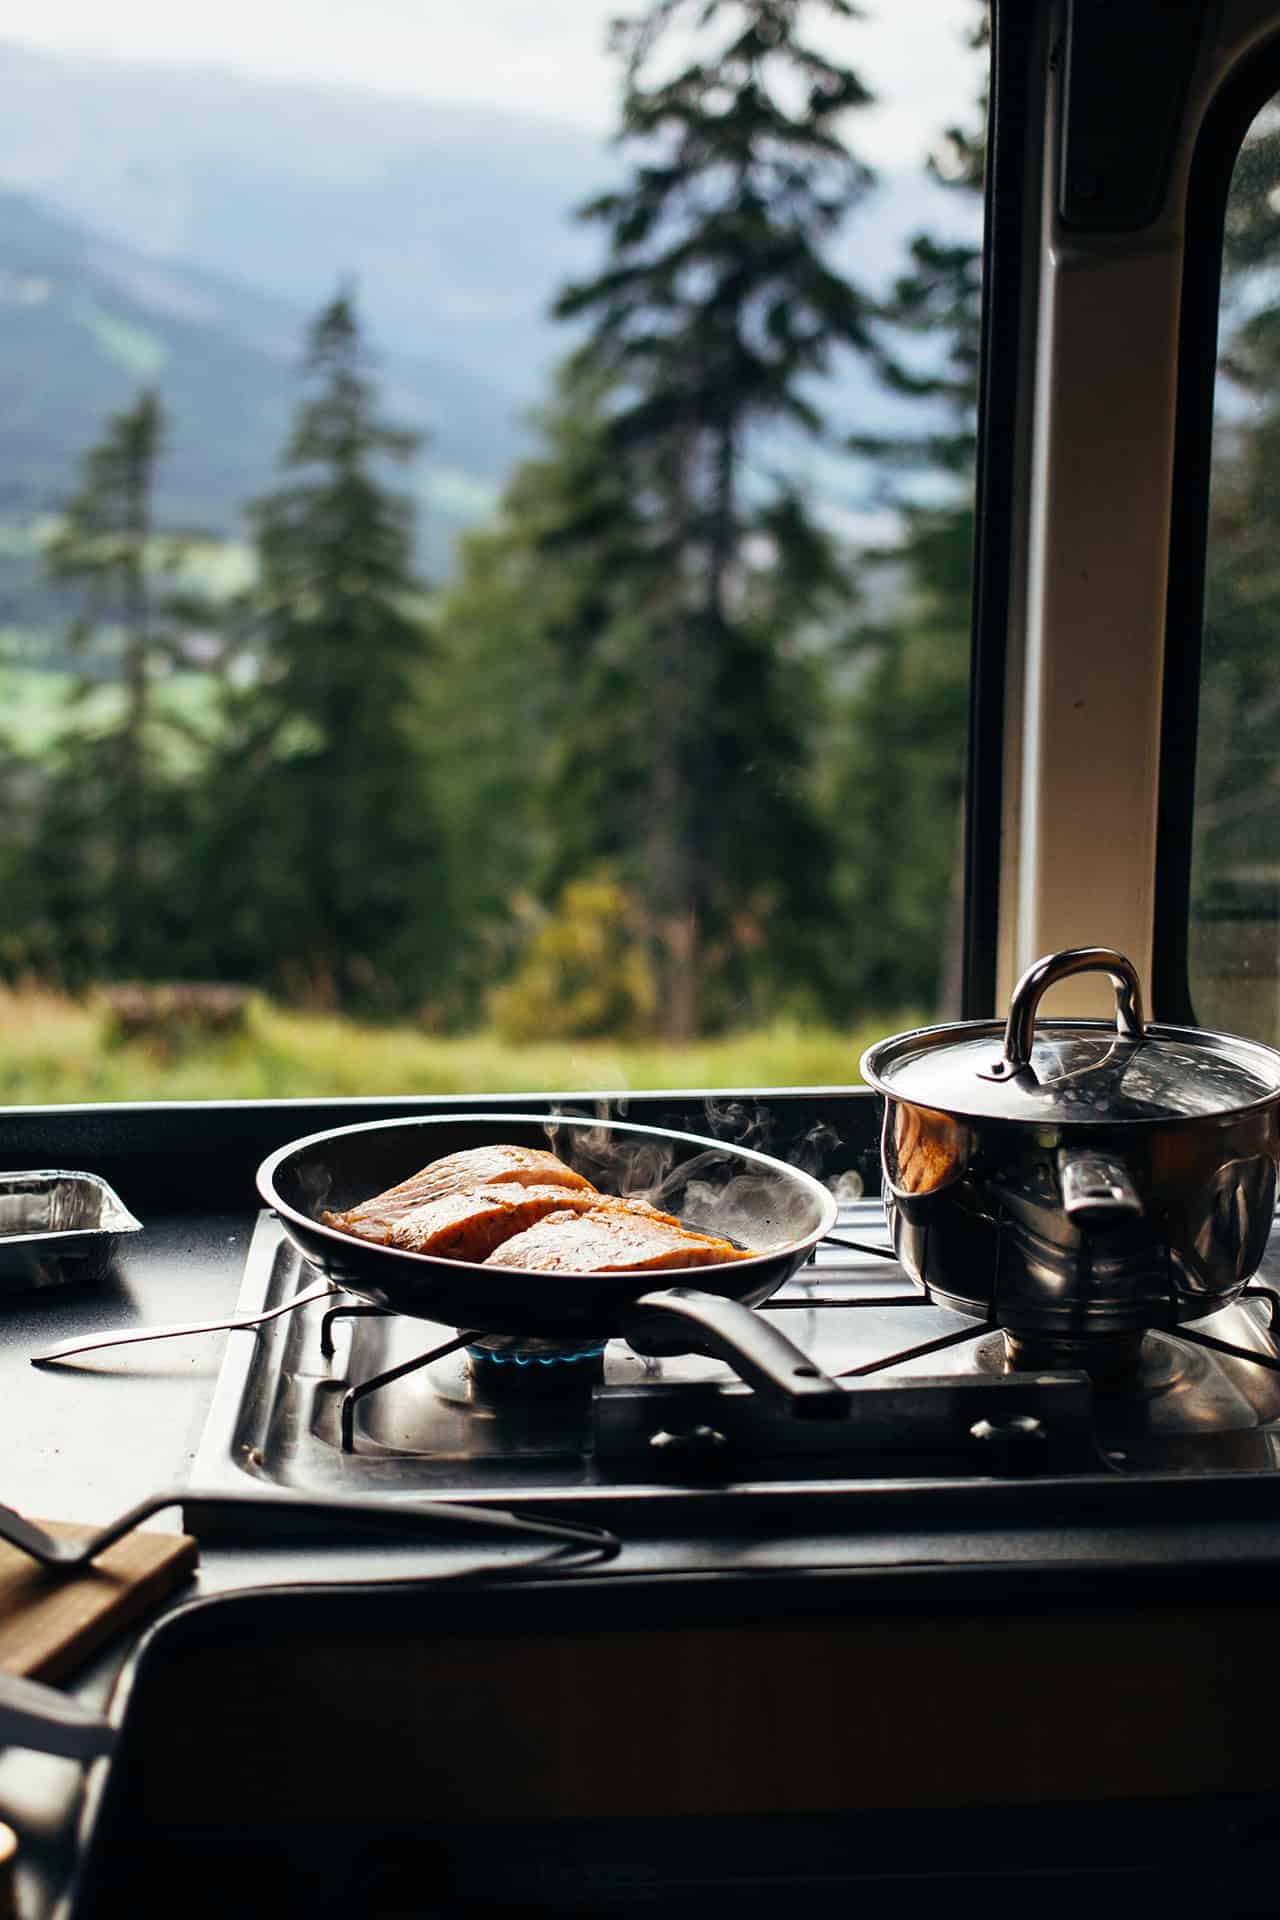 Close up on frying pan with organic salmon prepared in inside camper van on campsite in mountains or forest. Life on the road, camper van lifestyle outdoors vibes. Prepare food in converted vehicle